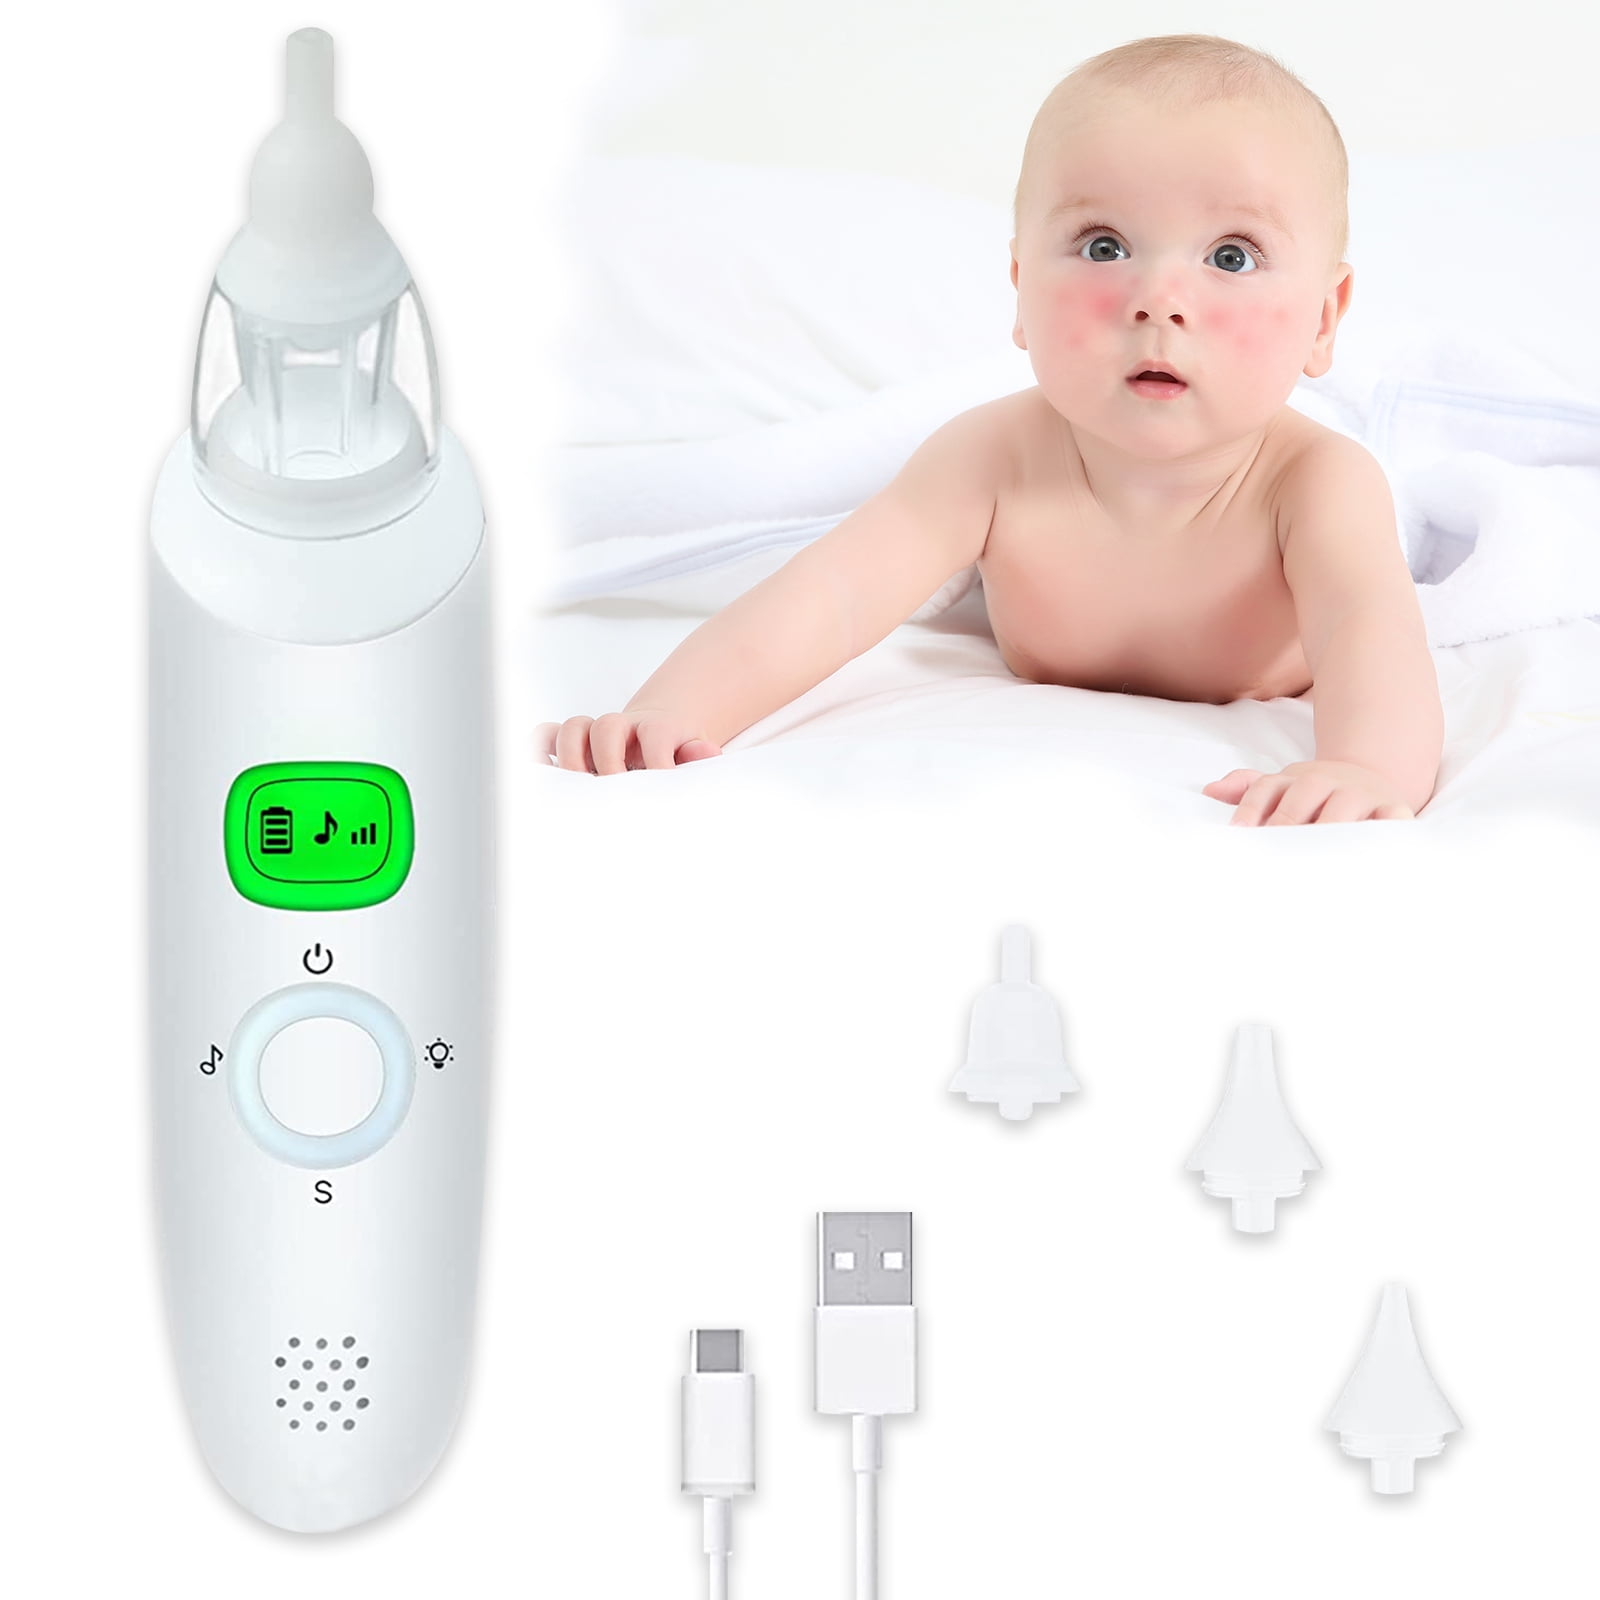 Baby's Nasal Aspirator Electric Nose Cleaner Hygienic to Newborn Infant Toddler 